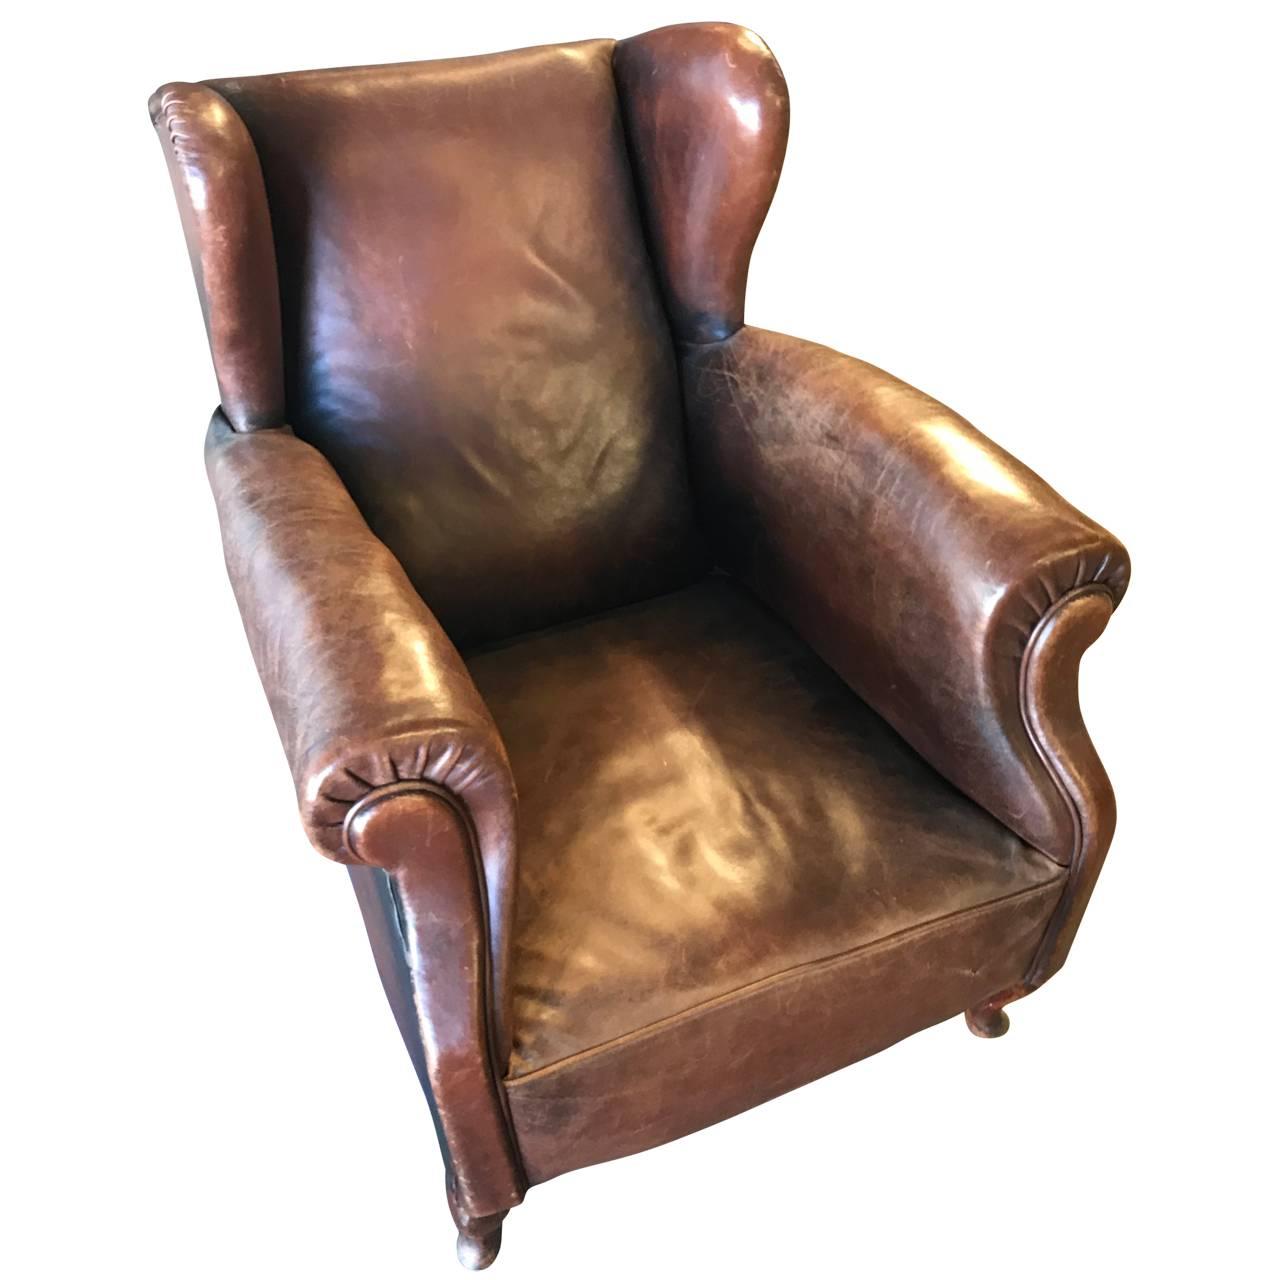 Beautiful low wingback armchair, in cognac colored leather with a great patina.

EUR125 delivery to most areas of London UK, Holland, Belgium, Northern Germany, Denmark and Sweden.